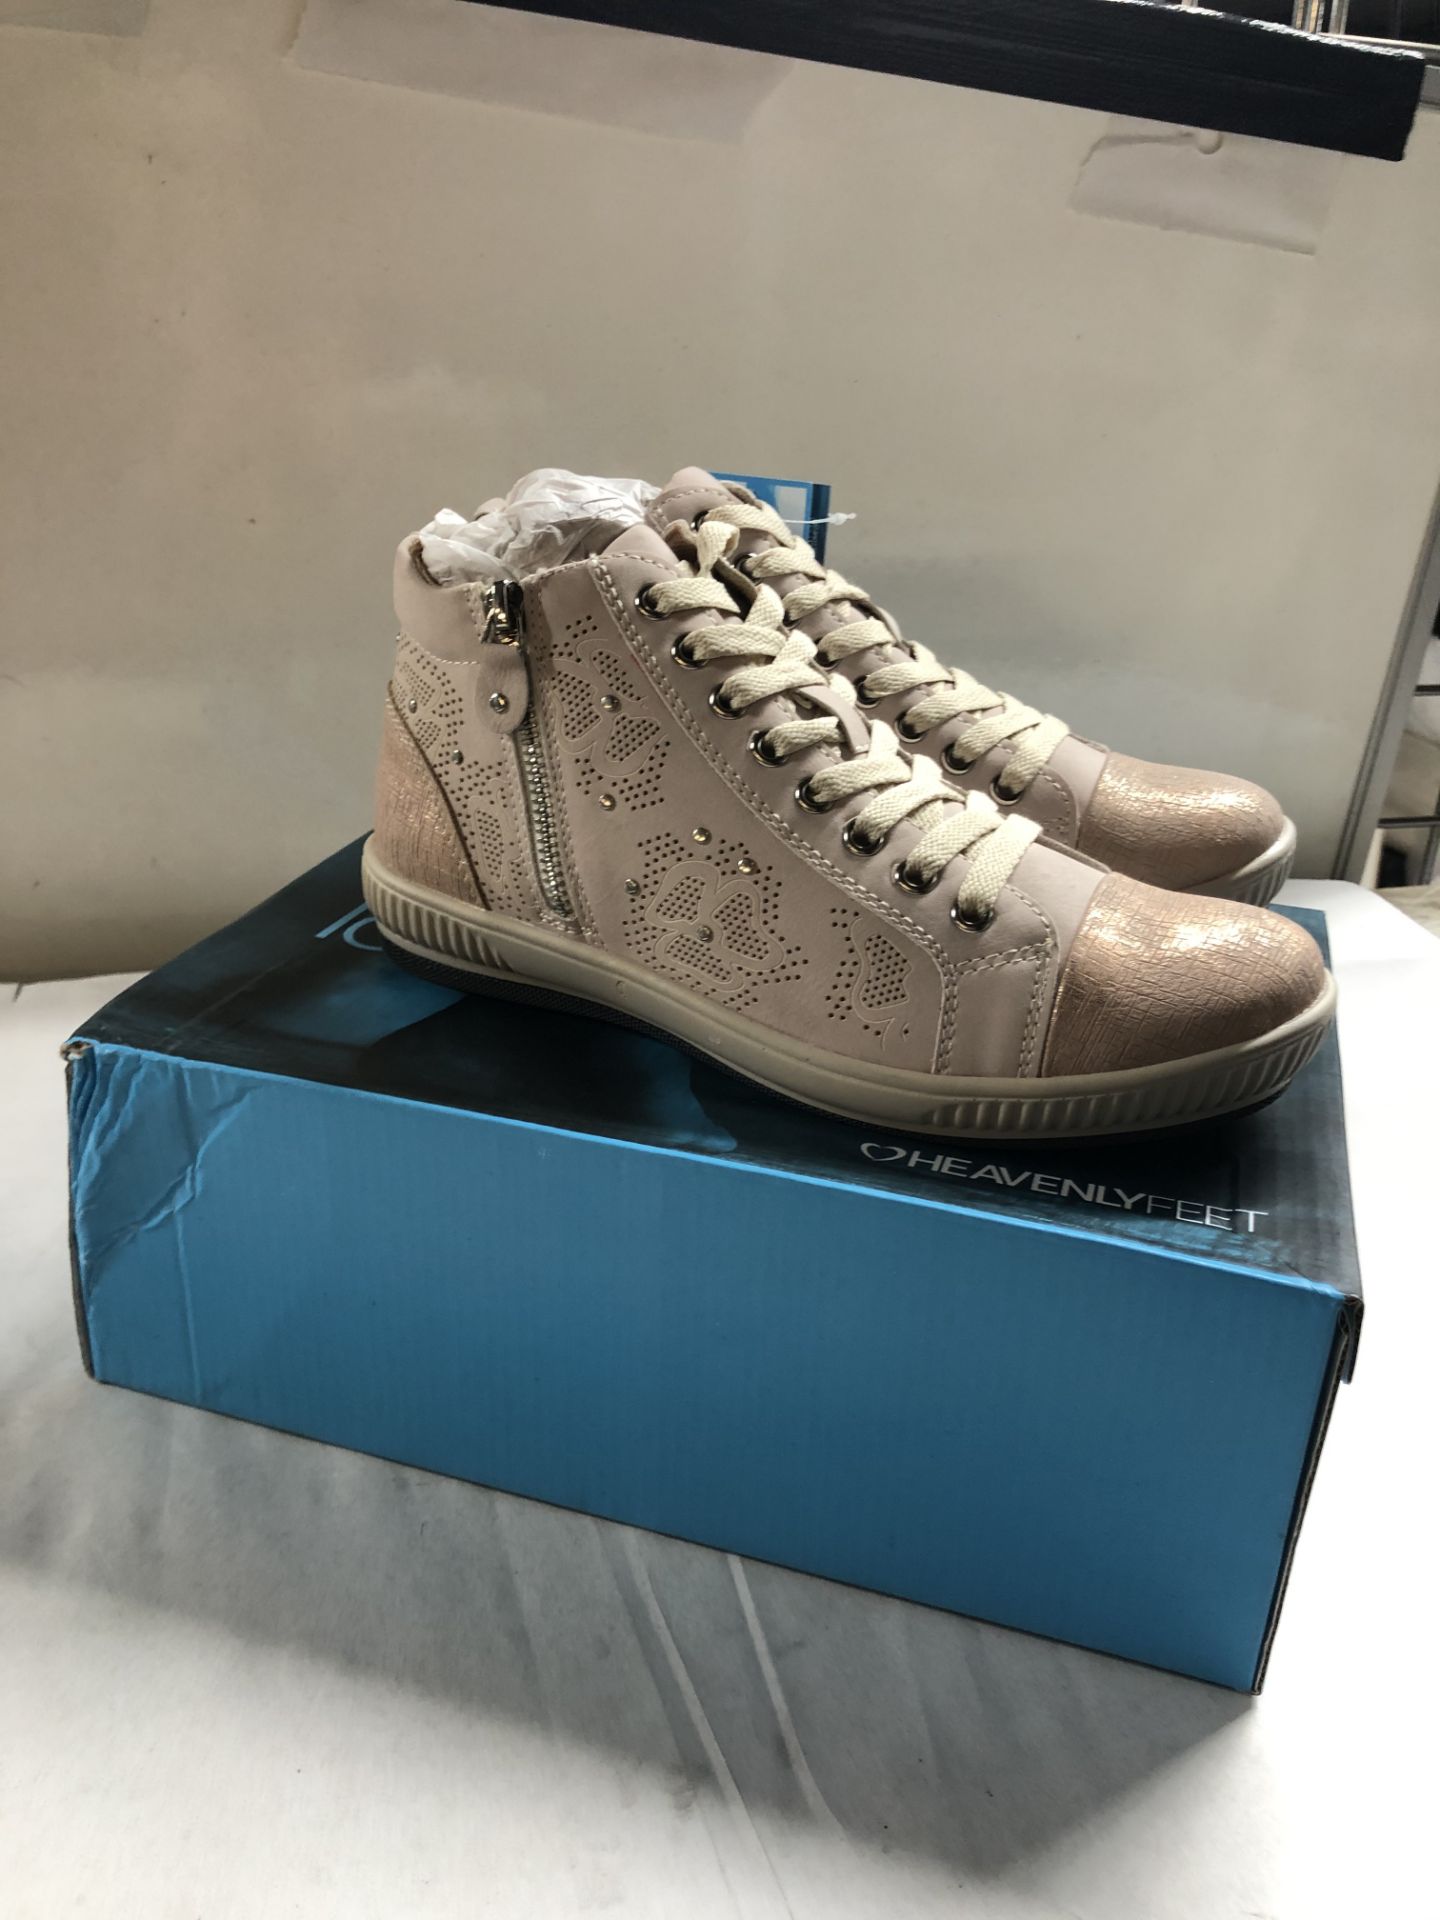 Heavenly Feet High Top Trainers. Eur 39 - Image 2 of 4